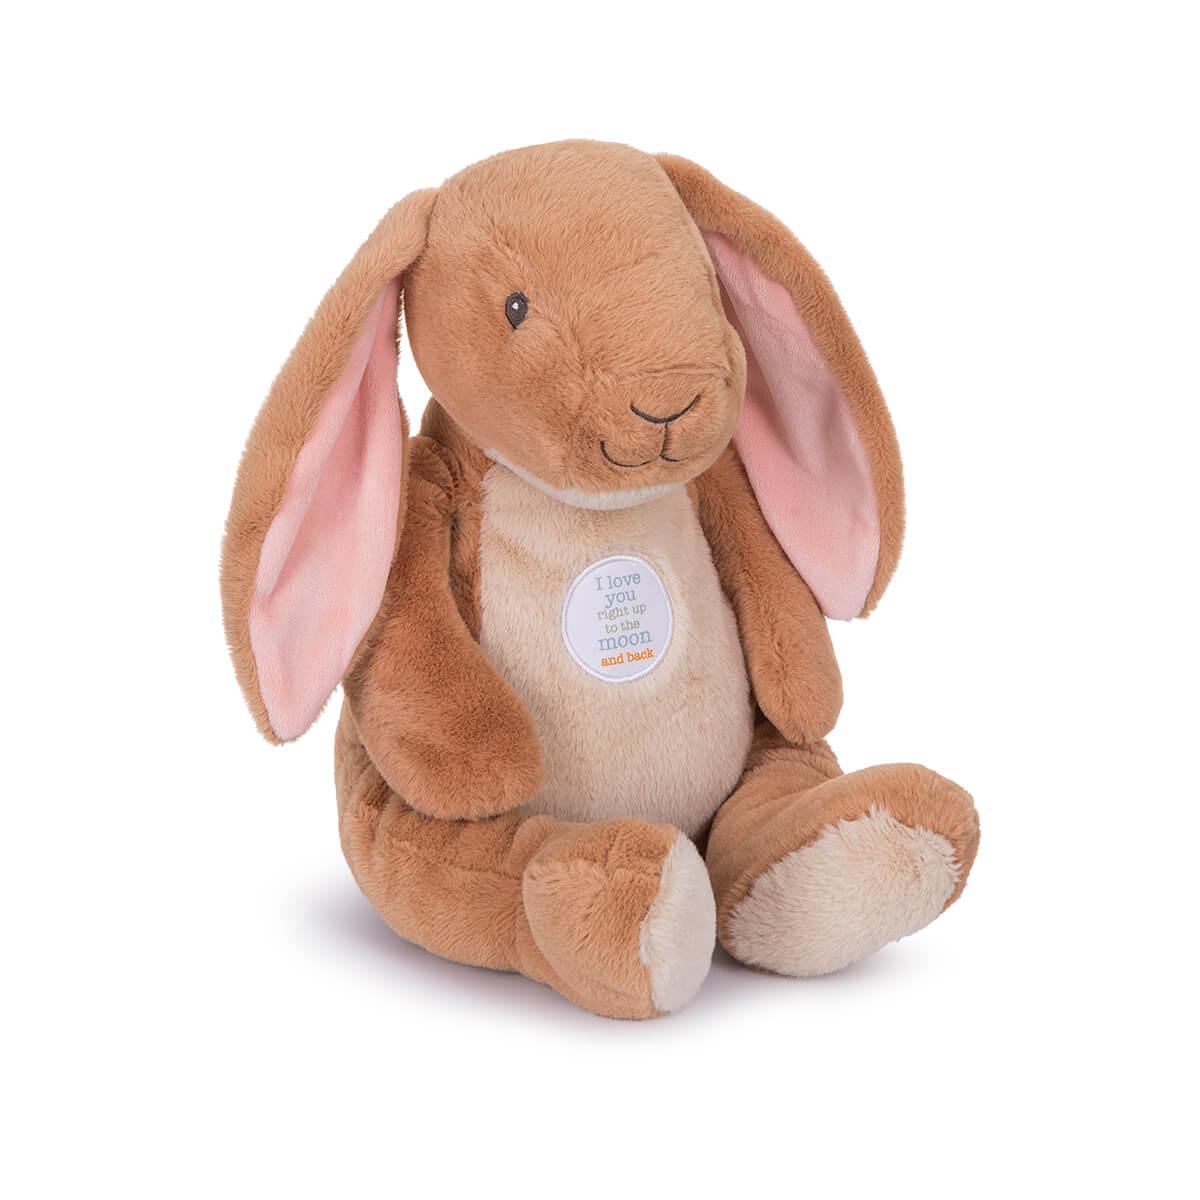  Floppy Nutbrown Hare Plush Toy